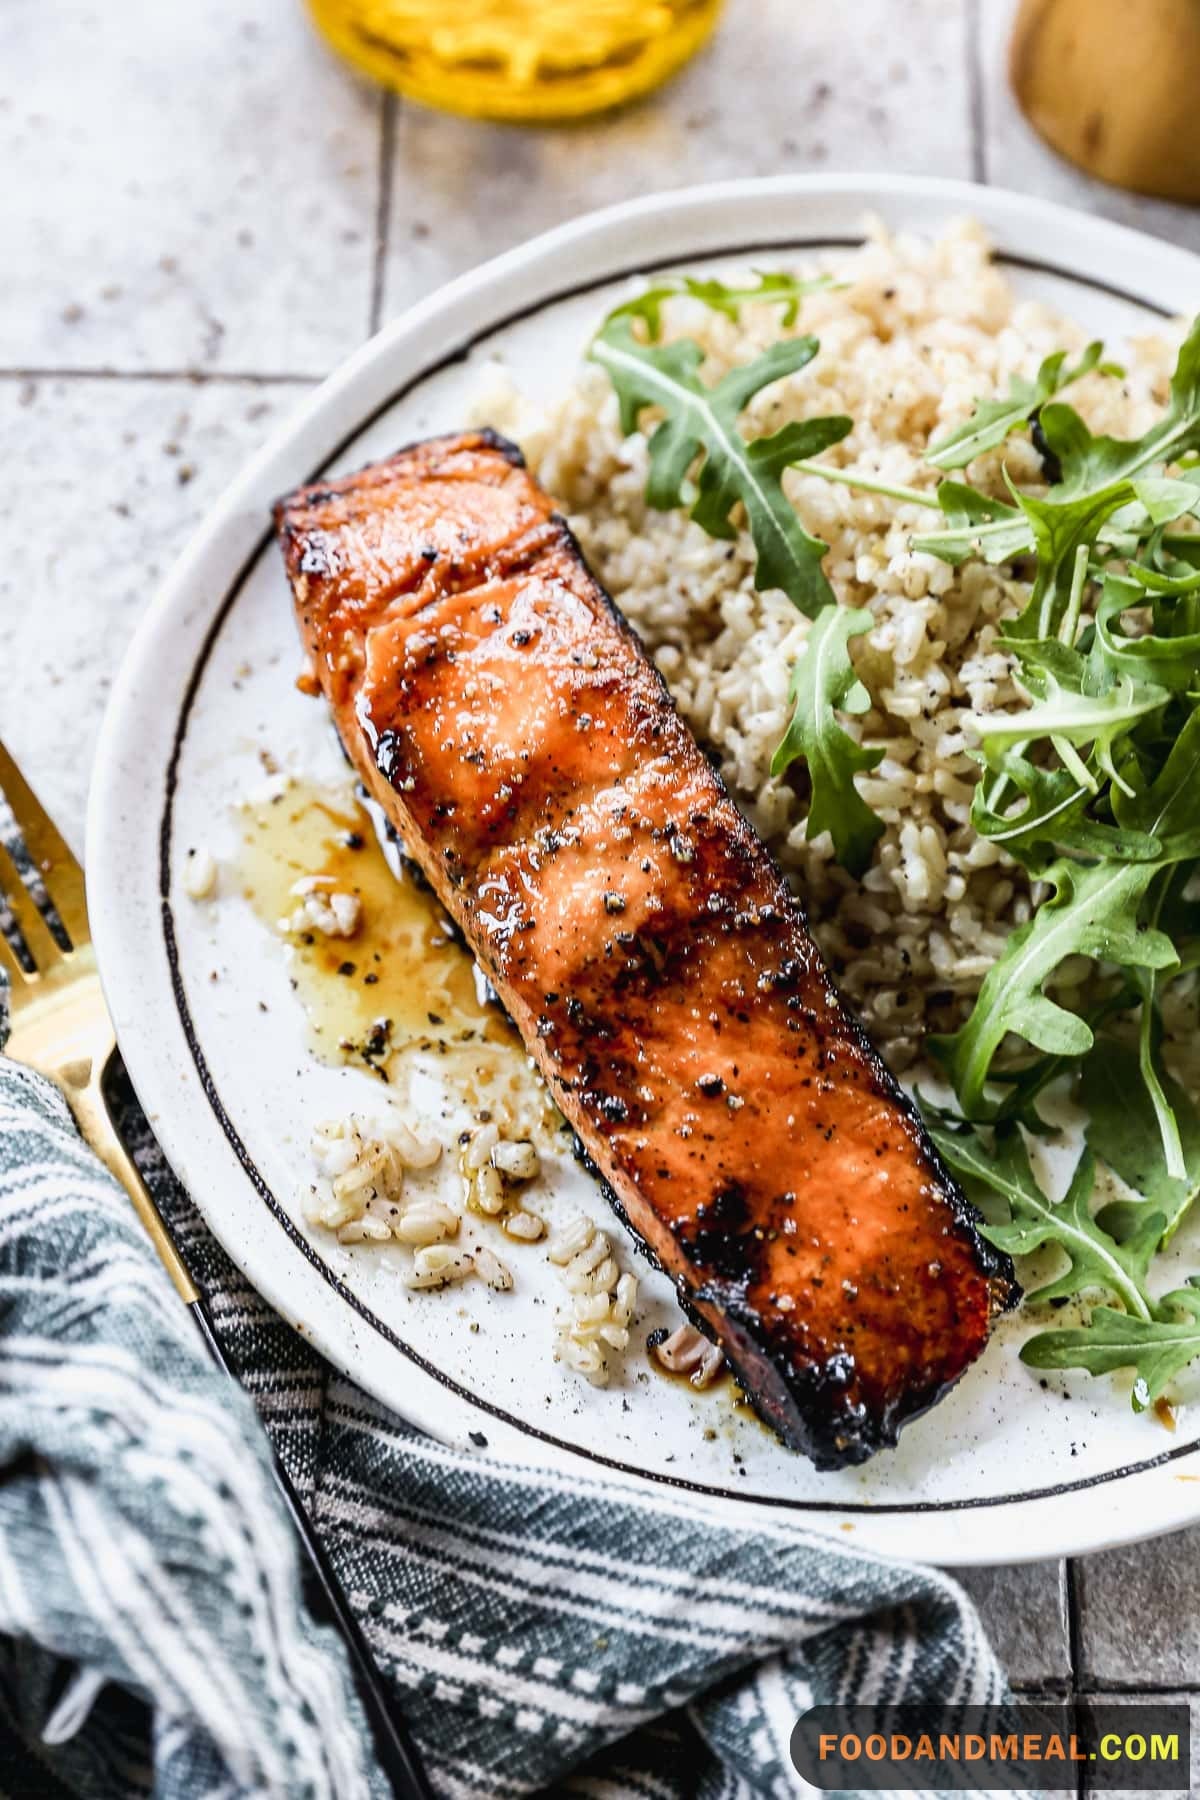 Grilled Salmon In Orange-Soy Marinade